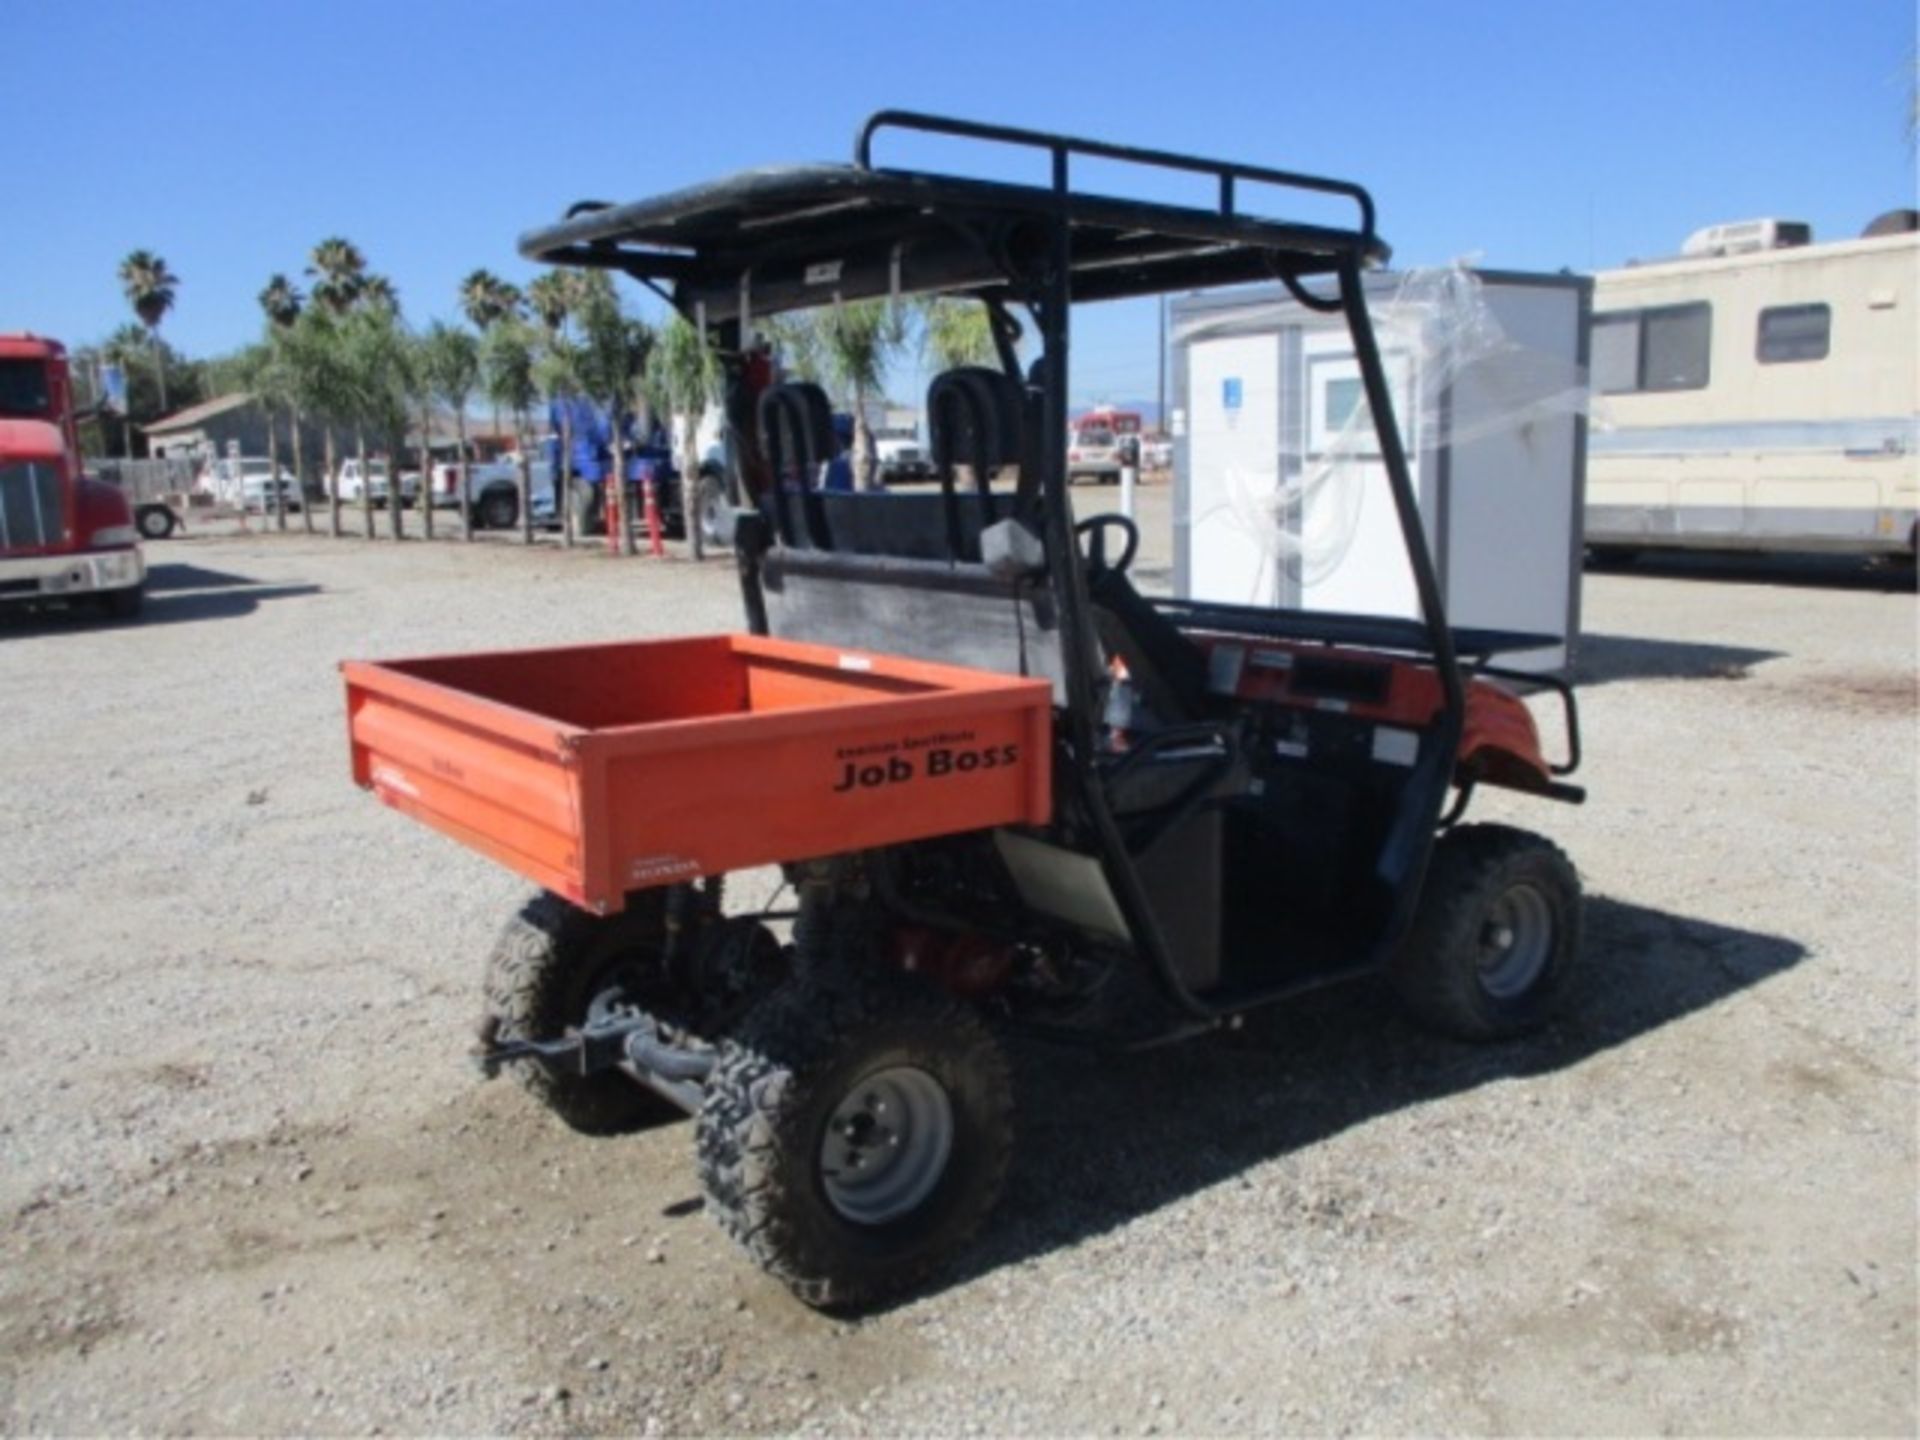 2008 American Sportworks Job Boss Utility Cart, Honda Gas, Rear Metal Dump Bed, Canopy, Tow Hitch, - Image 12 of 50